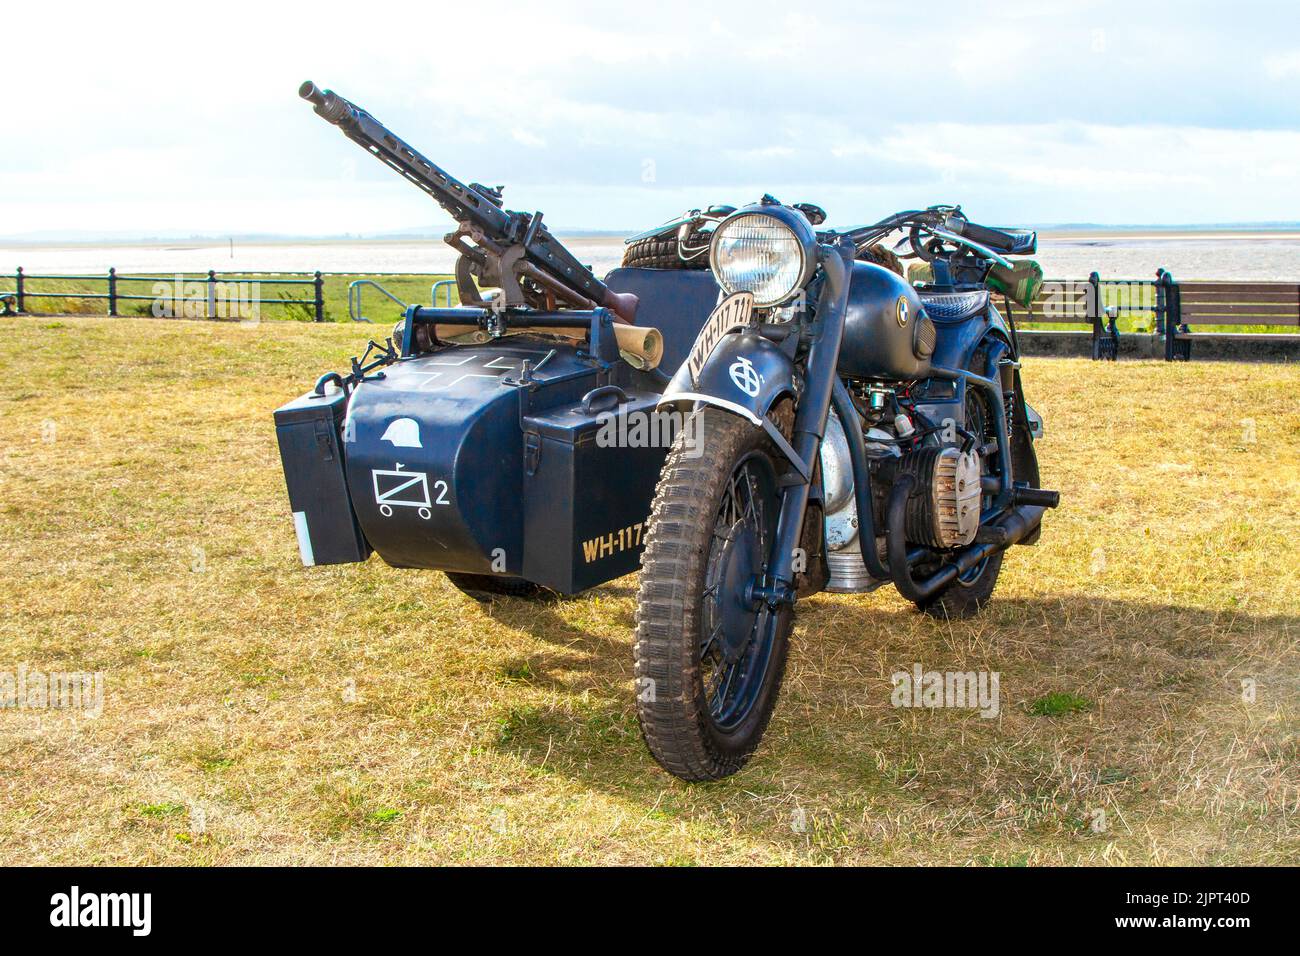 1958 50s, fifties, 1950s MZ-URAL, BMW R71 motorcycles,  Russian heavy motorcycle & sidecar; World War II, Second World War, WWII, WW2. Military vehicle at Lytham 1940's Festival Wartime Weekend 2022 Stock Photo